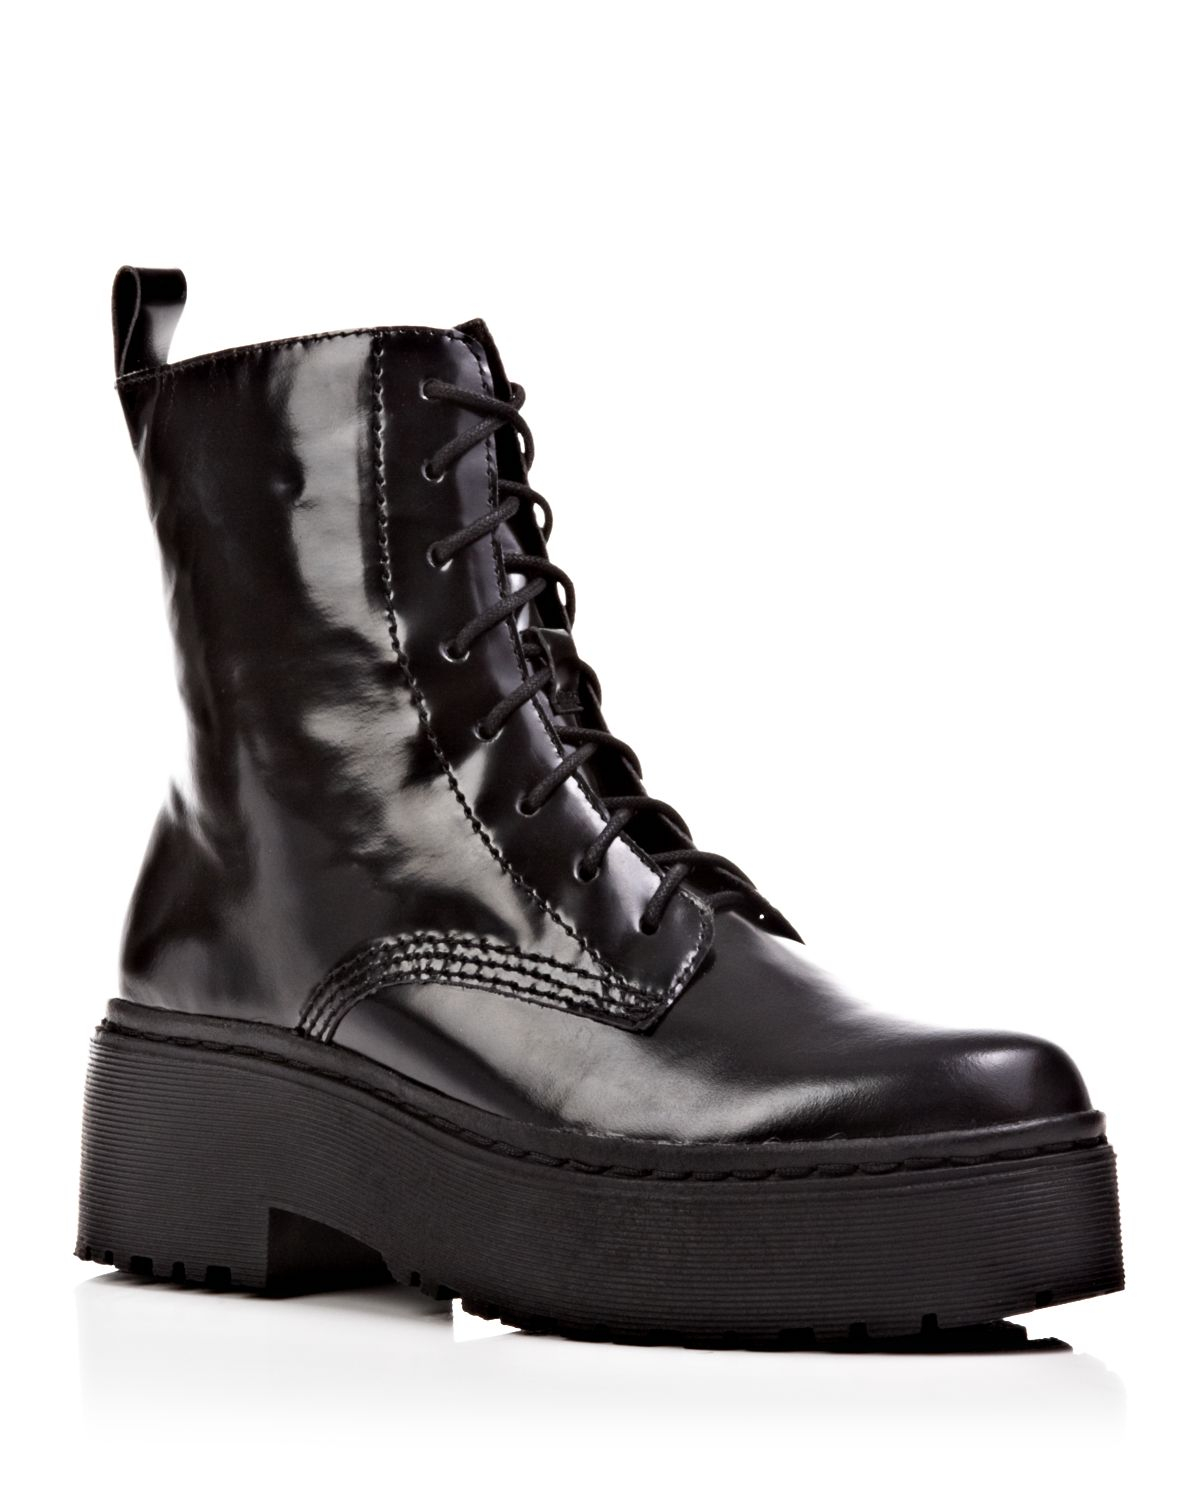 Jeffrey Campbell Lace Up Platform Combat Boots - Finnick in Black - Lyst